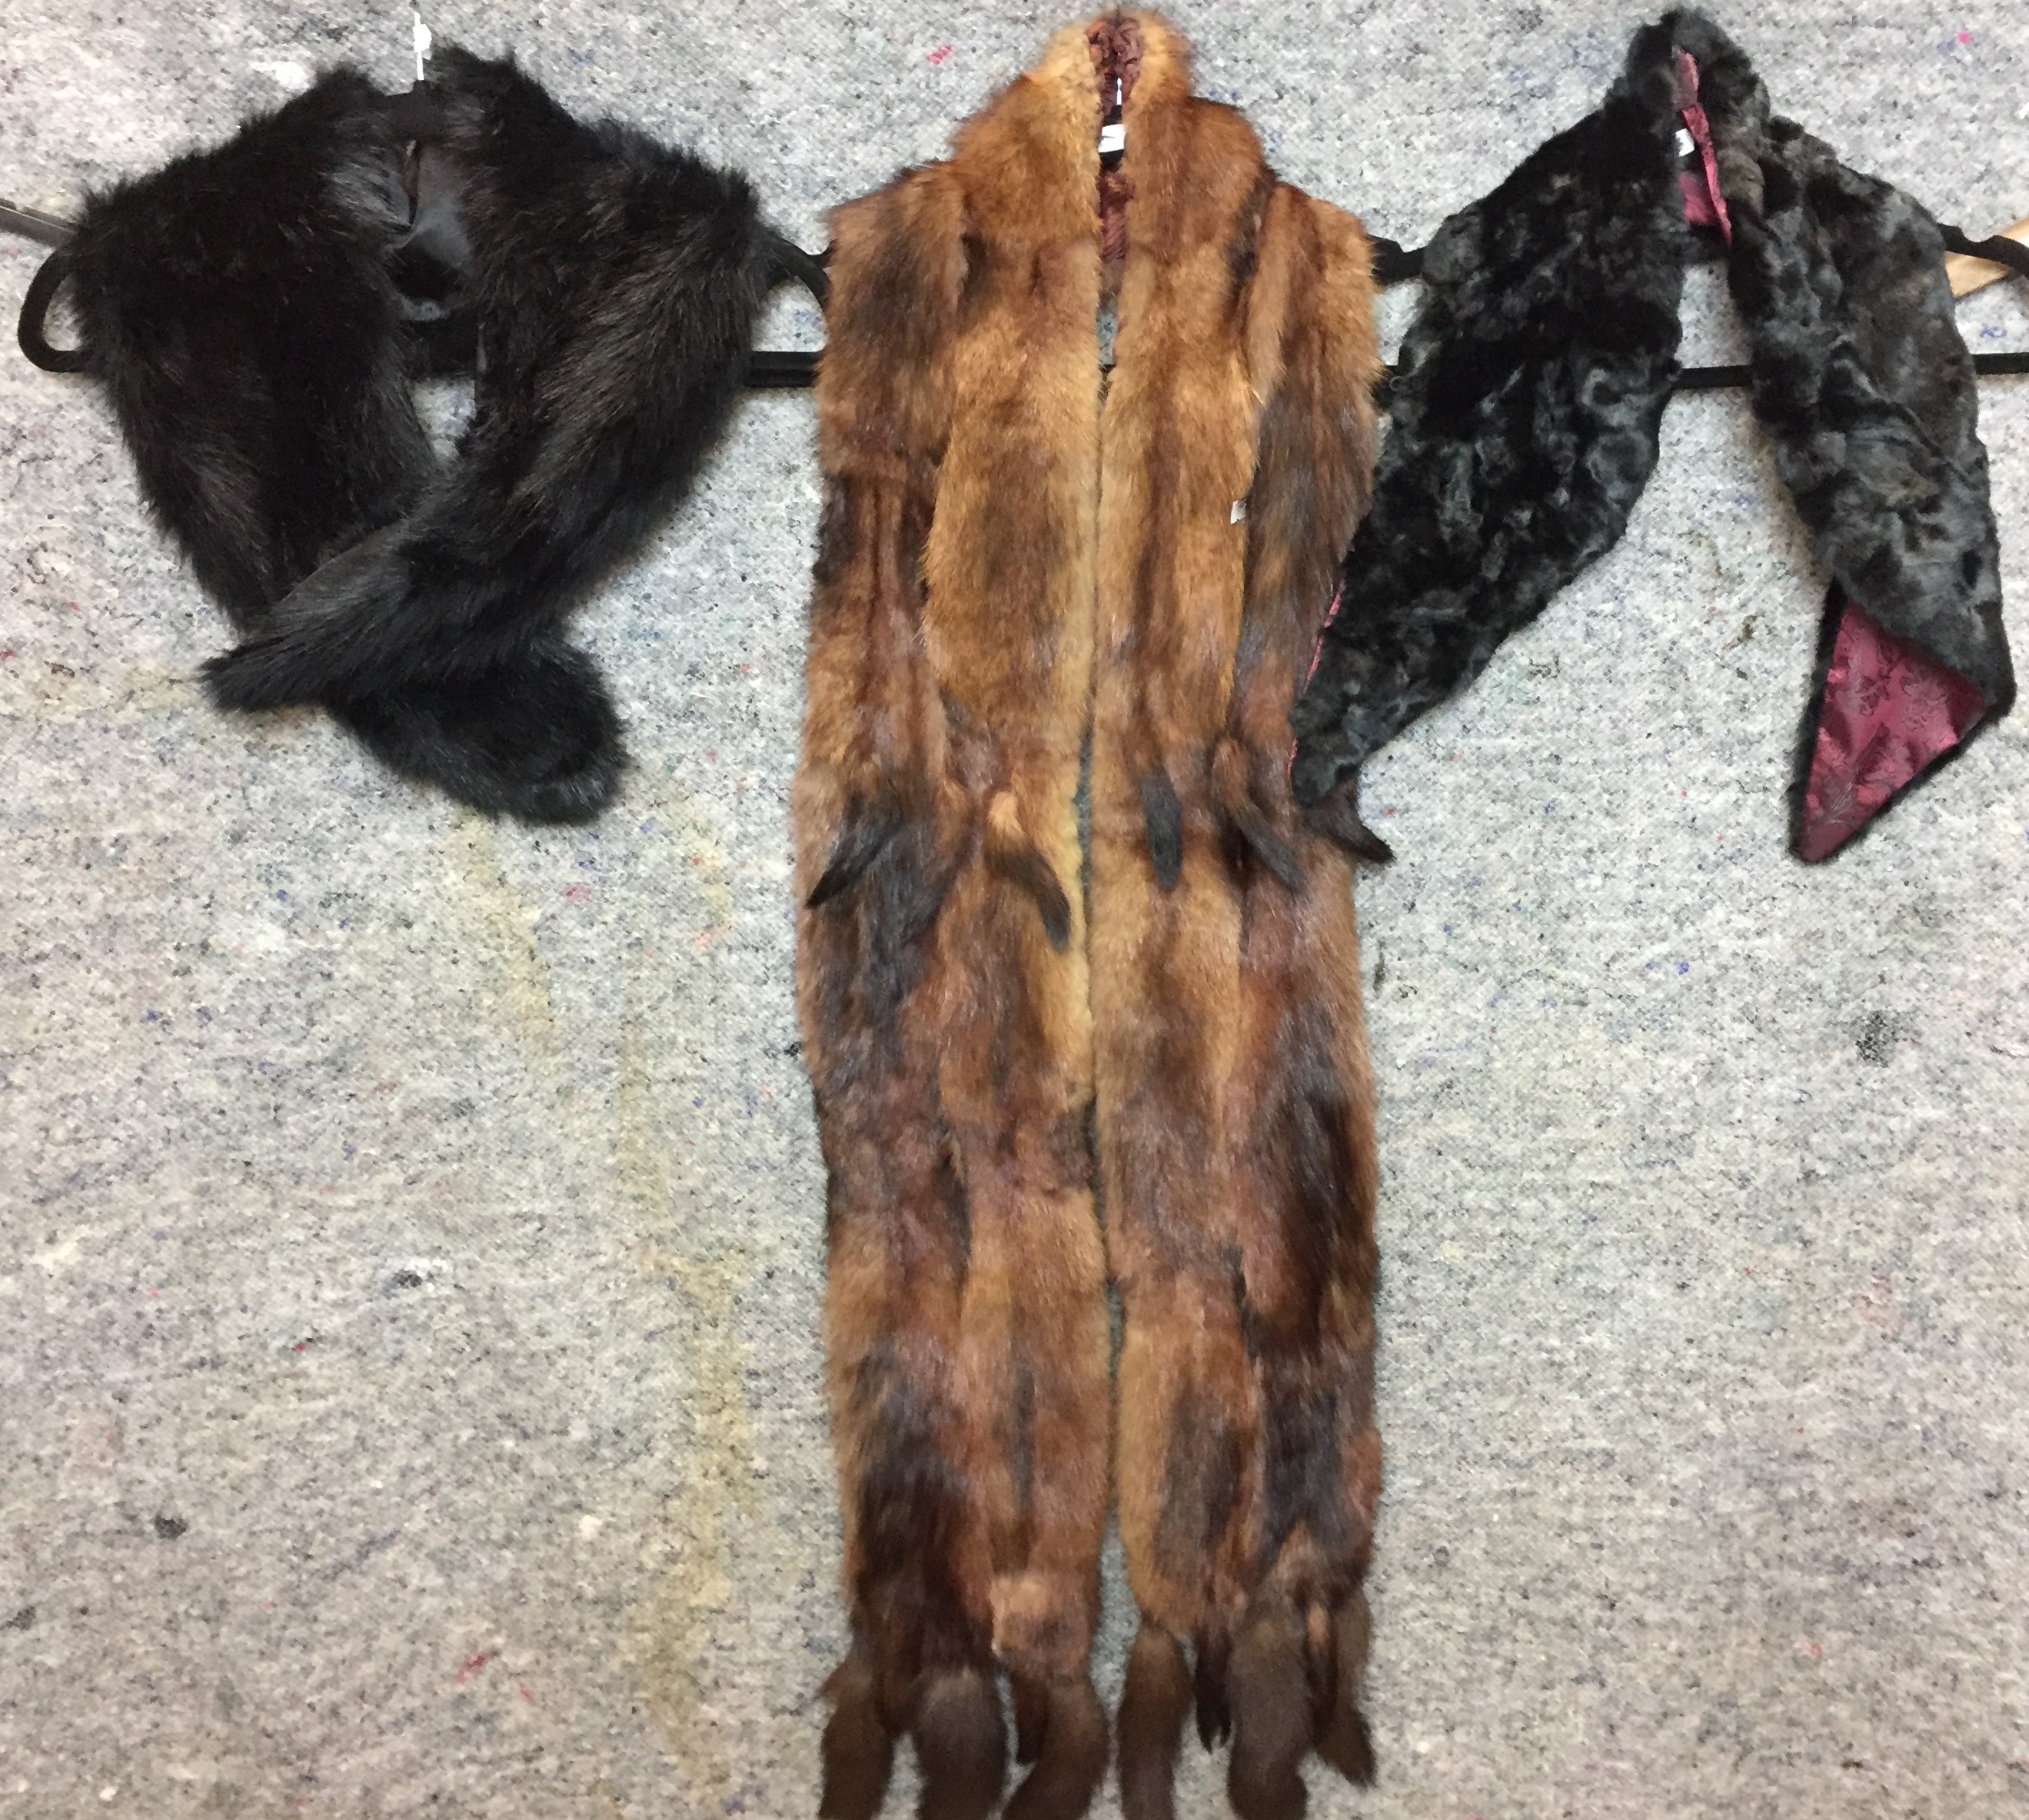 Three fur accessories - two black collars and a long mink stole (Saleroom location: on rail at